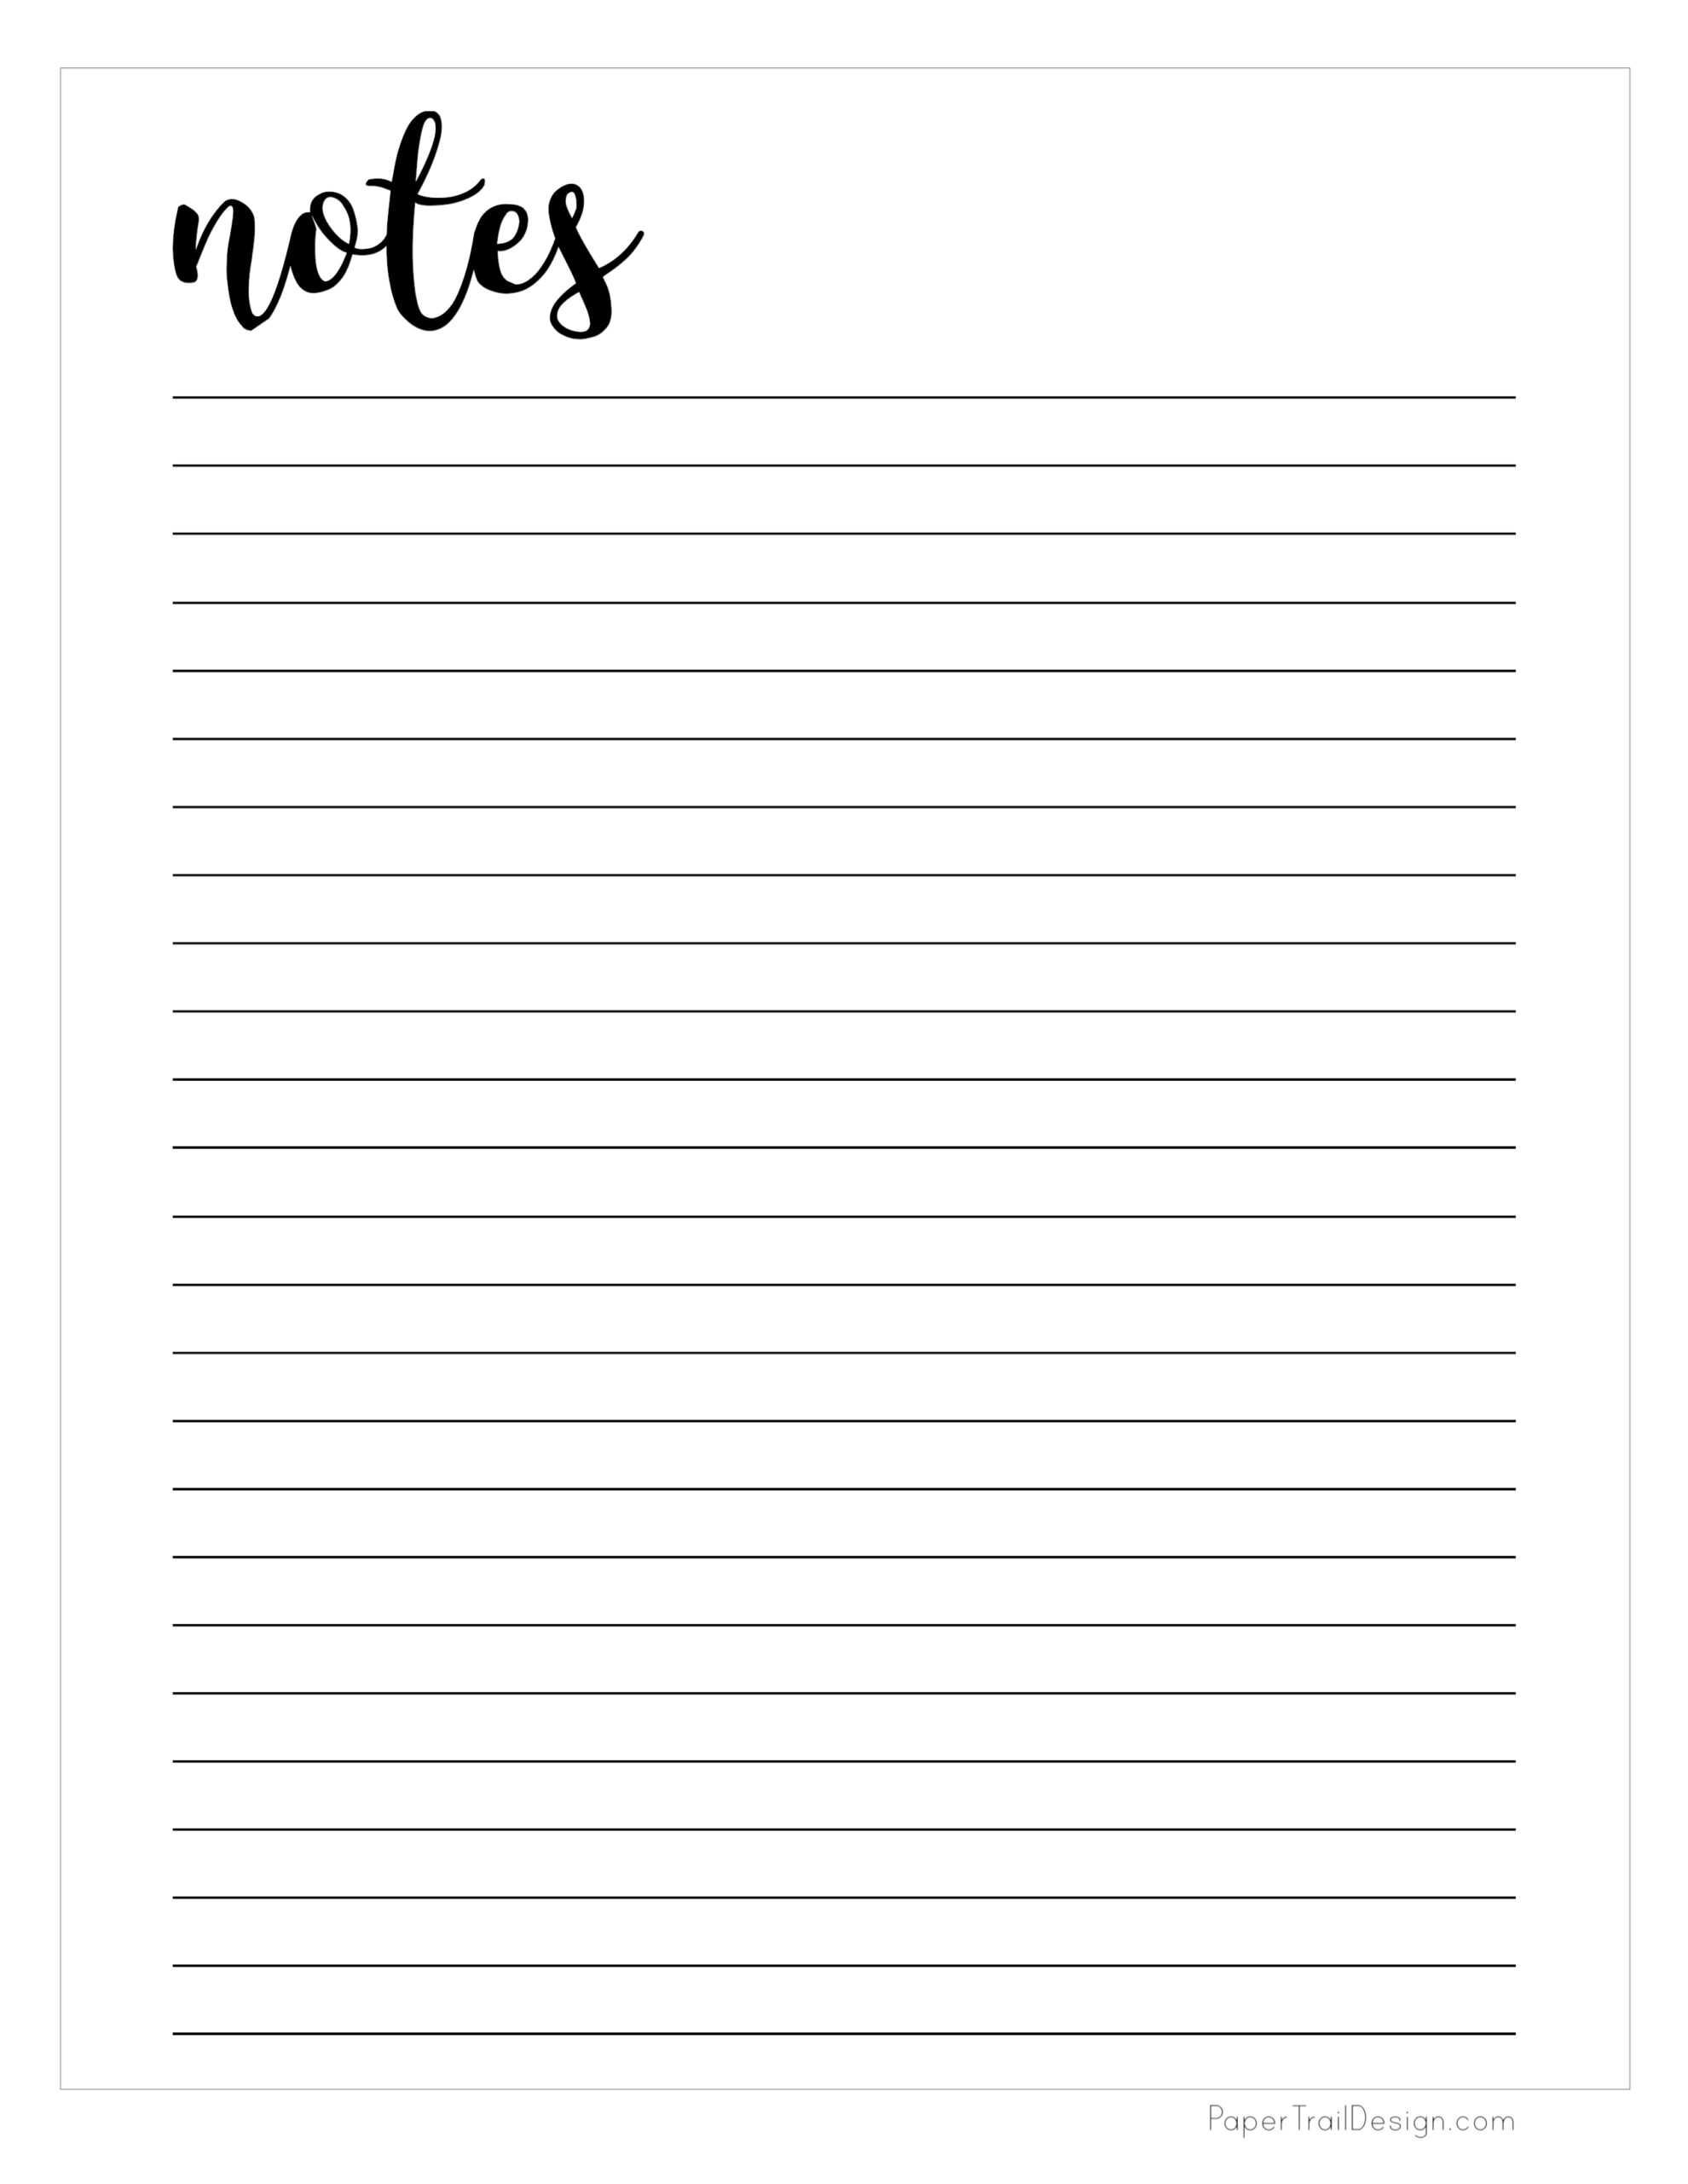 Free Notes Template FREE PRINTABLE TEMPLATES